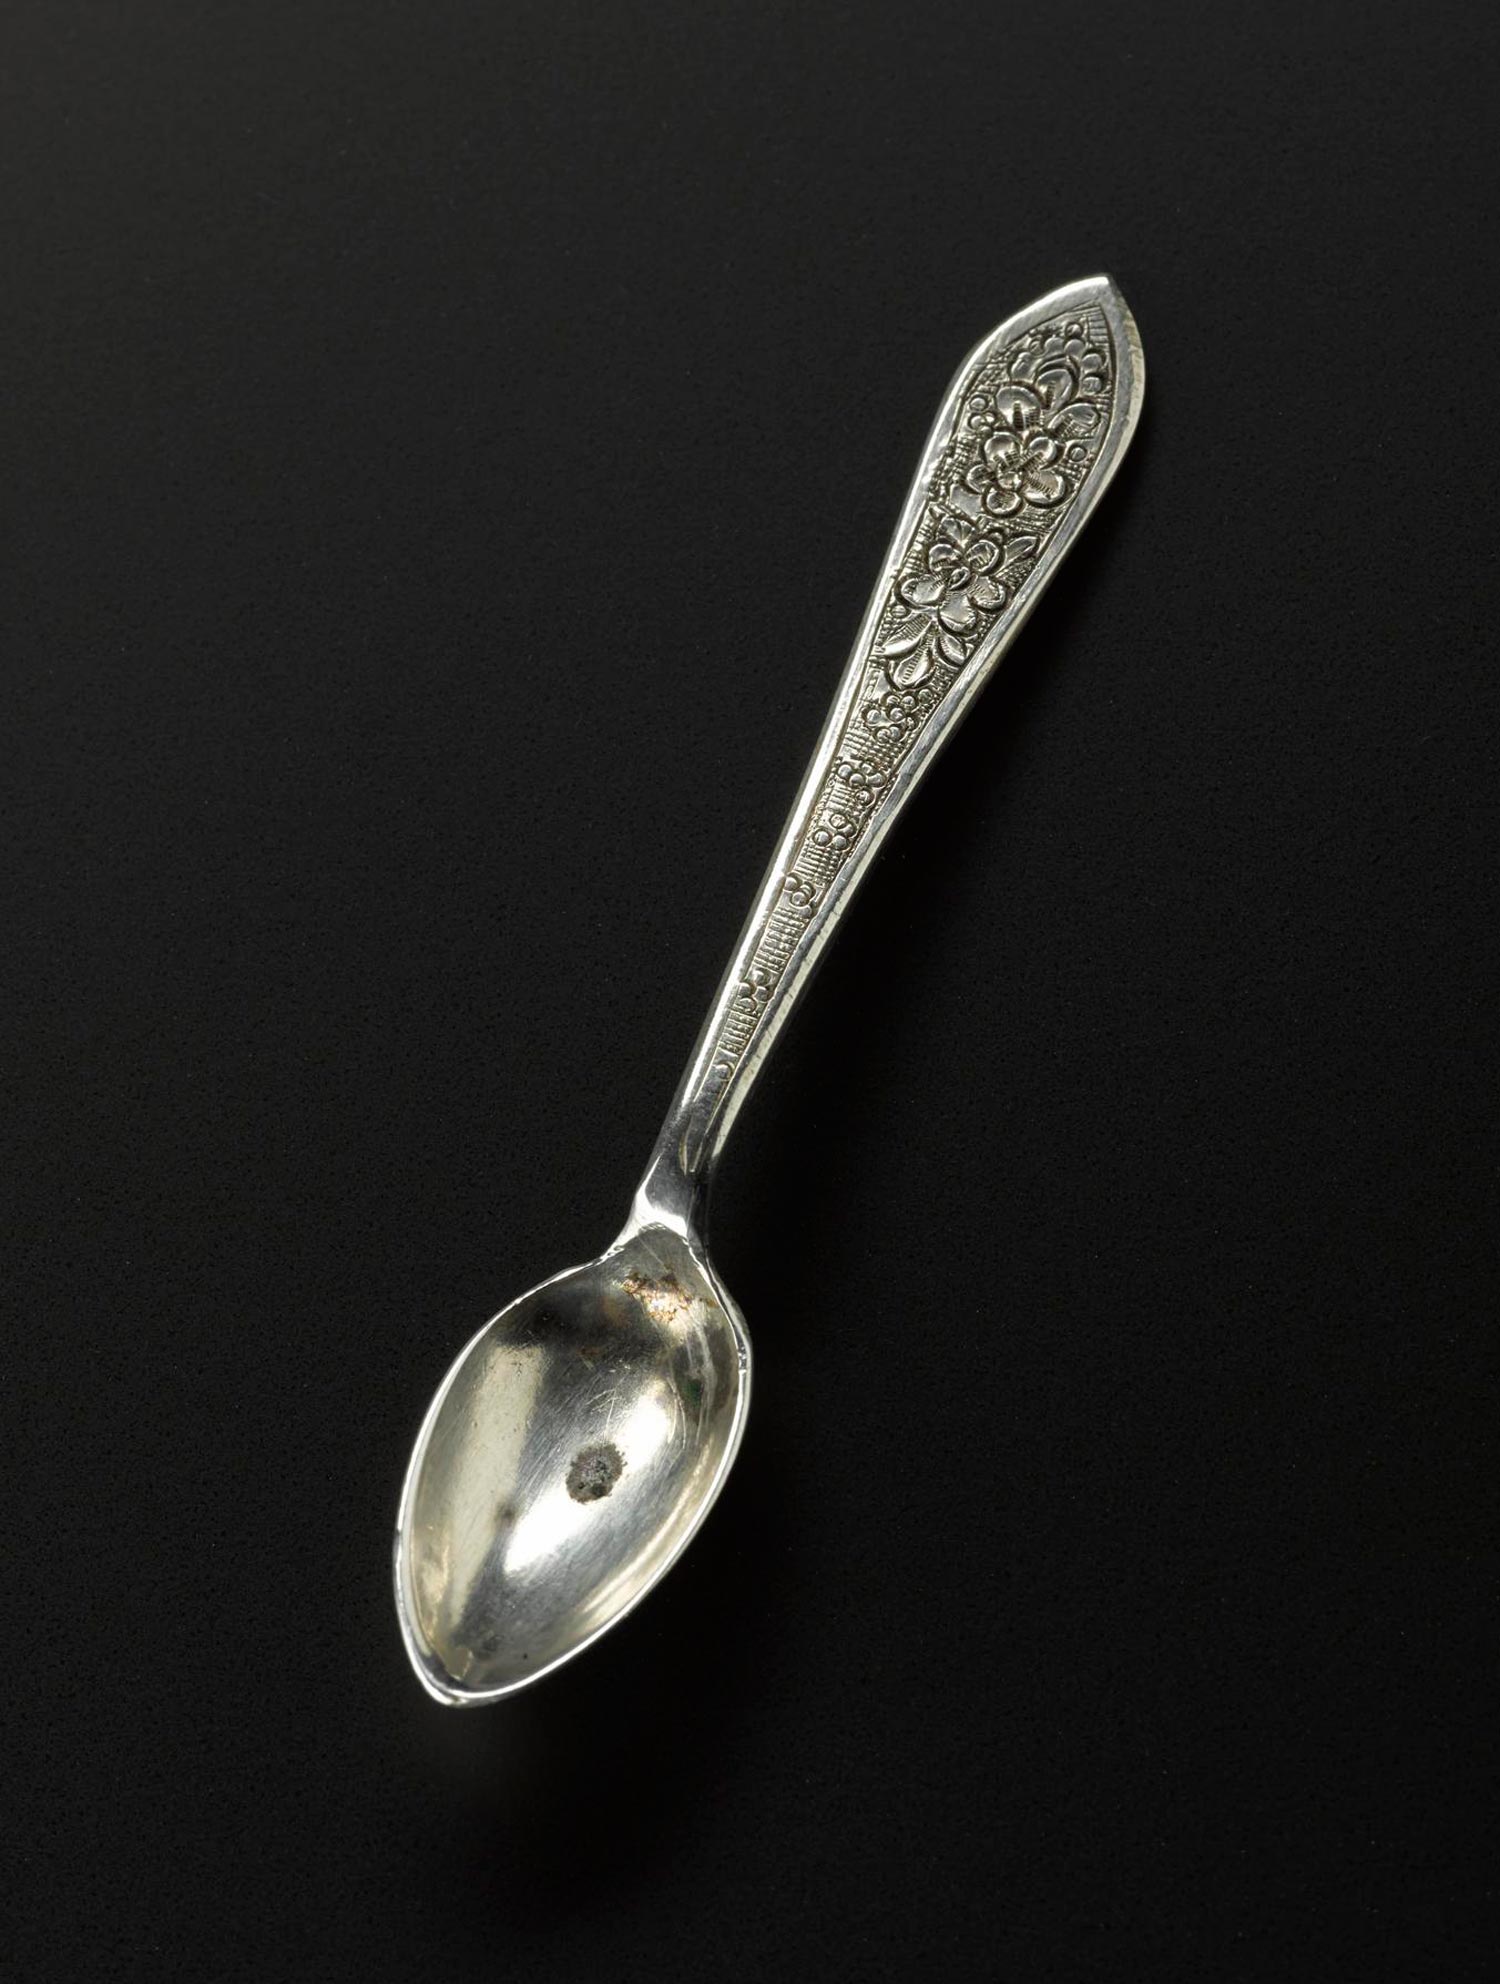 Spoon of silver with floral decoration on the handle, used as part of a set with a bowl, Iran, probably Isfahan, 1920s-1940s, acc. no V.2015.69.2